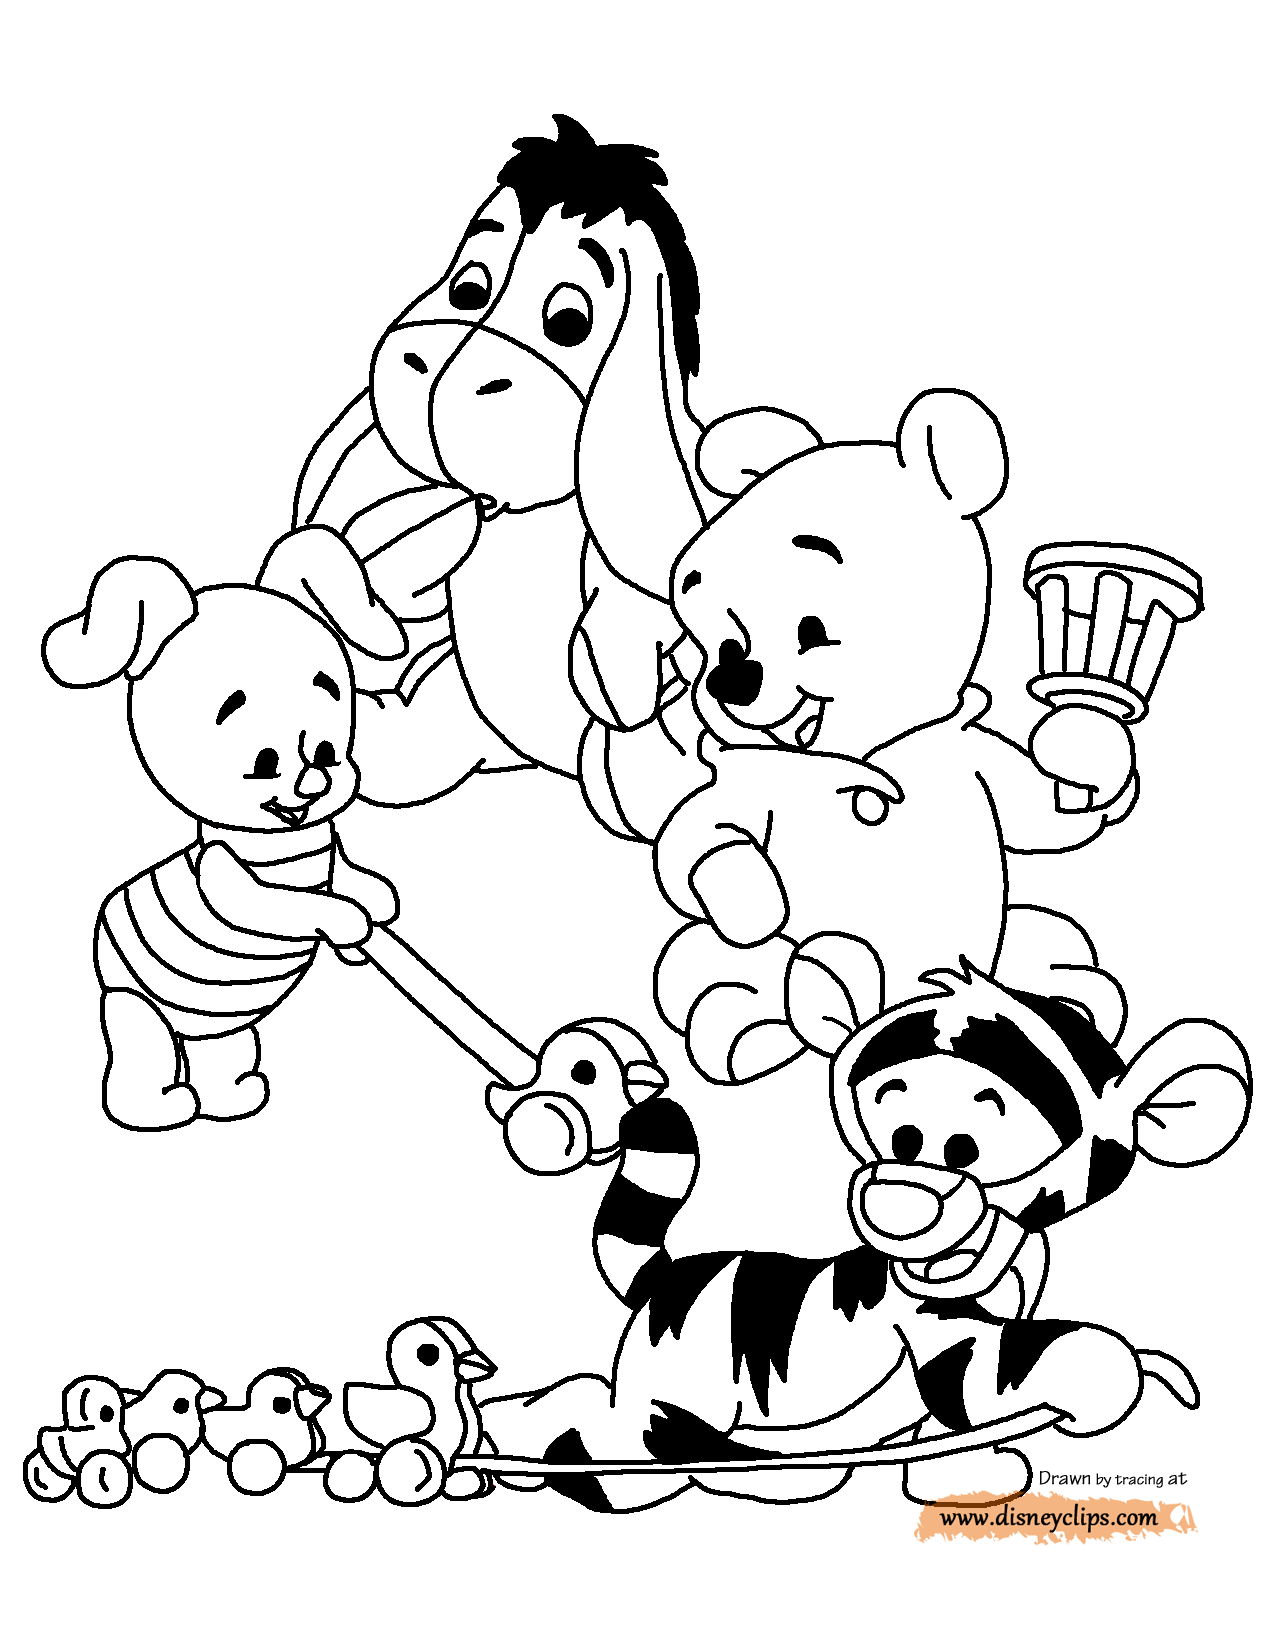 Free Easy Baby Disney Coloring Pages Download Free Easy Baby Disney Coloring Pages Png Images Free Cliparts On Clipart Library